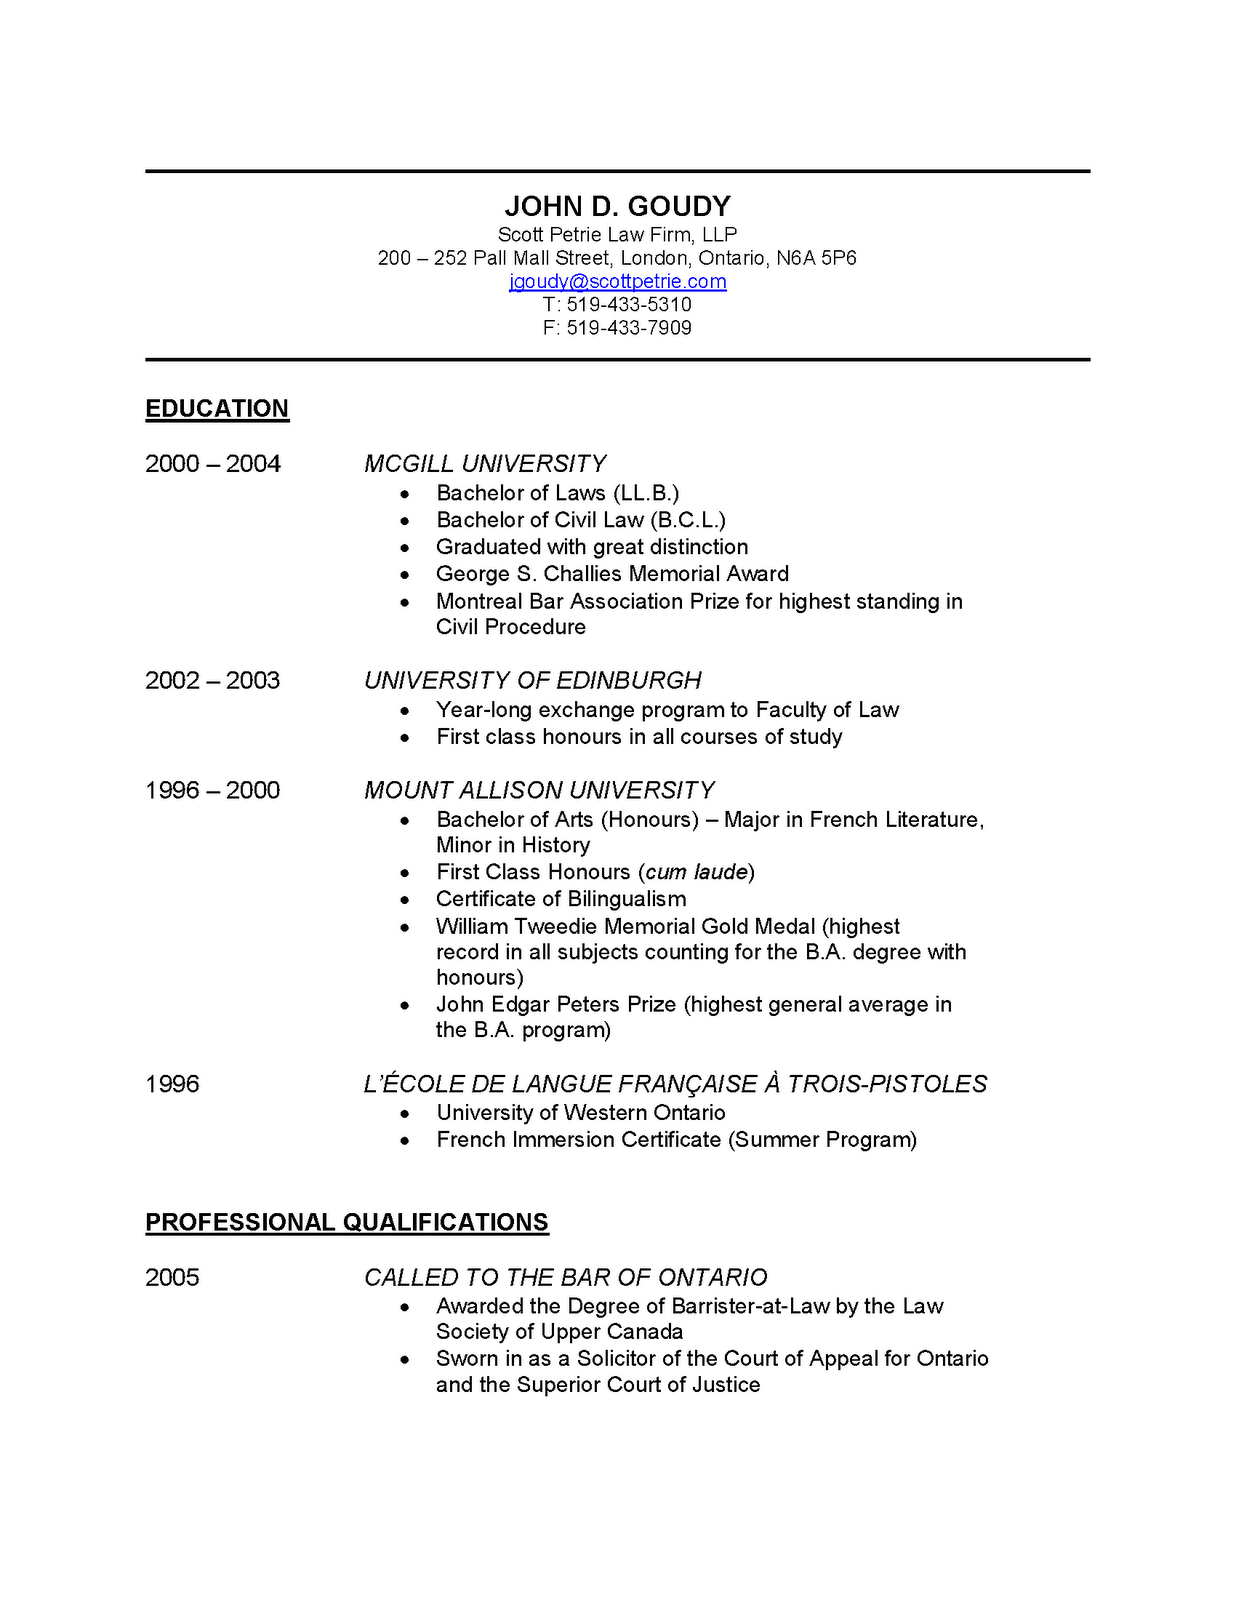 Curriculum Vitae For Law Students